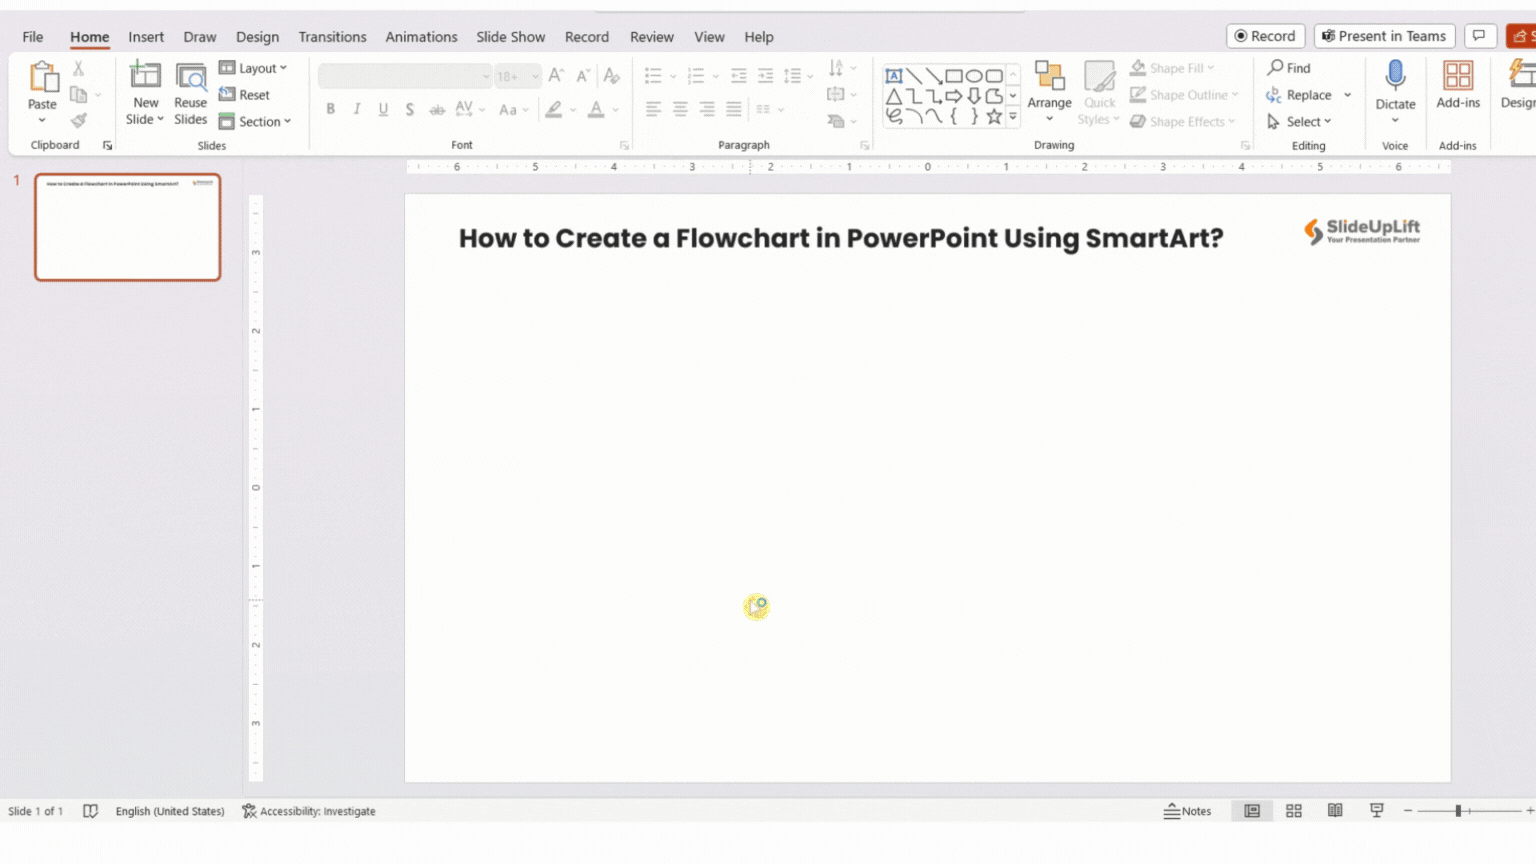 How to Create a Flowchart in PowerPoint Using SmartArt